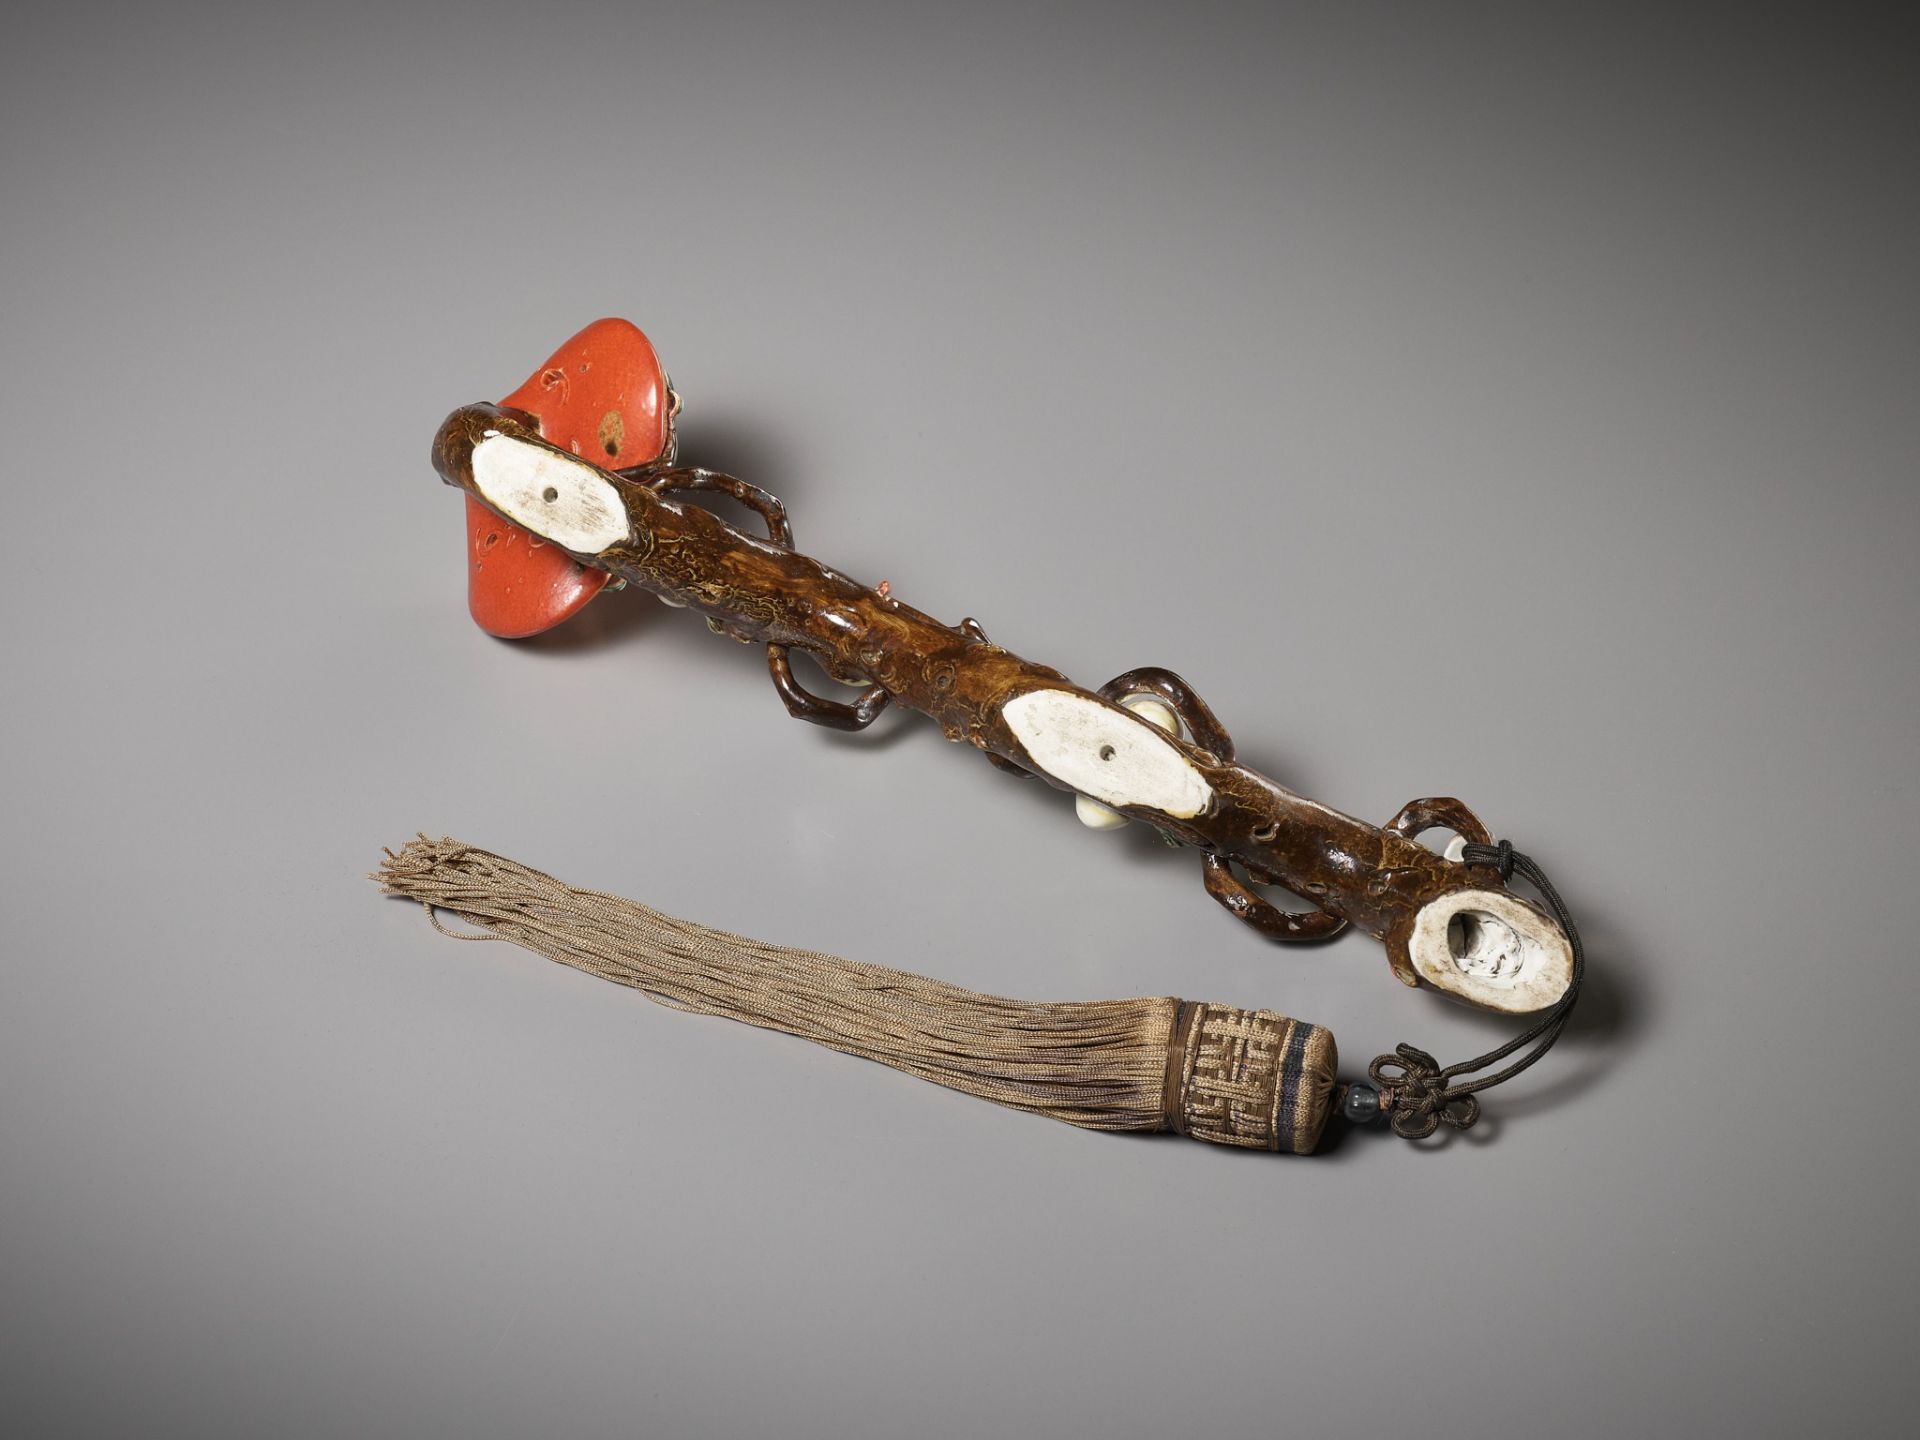 A FAMILLE ROSE PORCELAIN 'LINGZHI' RUYI SCEPTER, MID-QING DYNASTY - Image 10 of 12